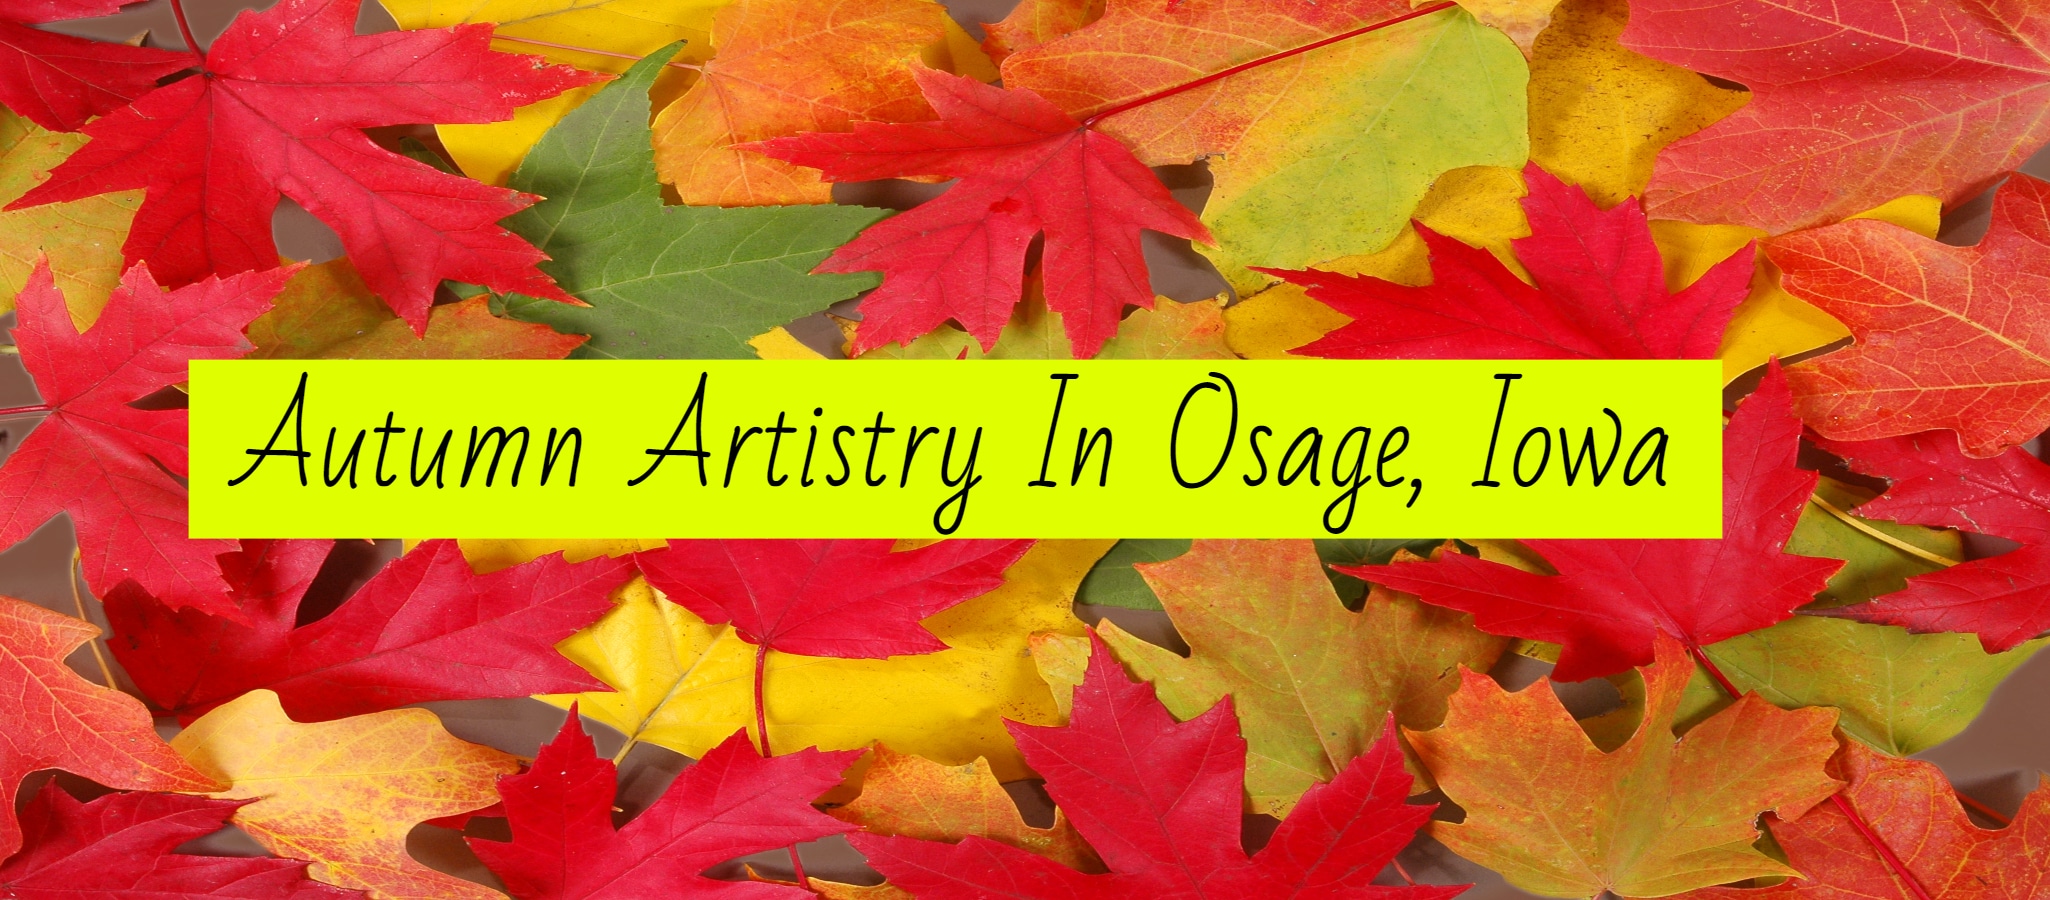 Autumn Artistry Is Coming To Osage, Iowa In September